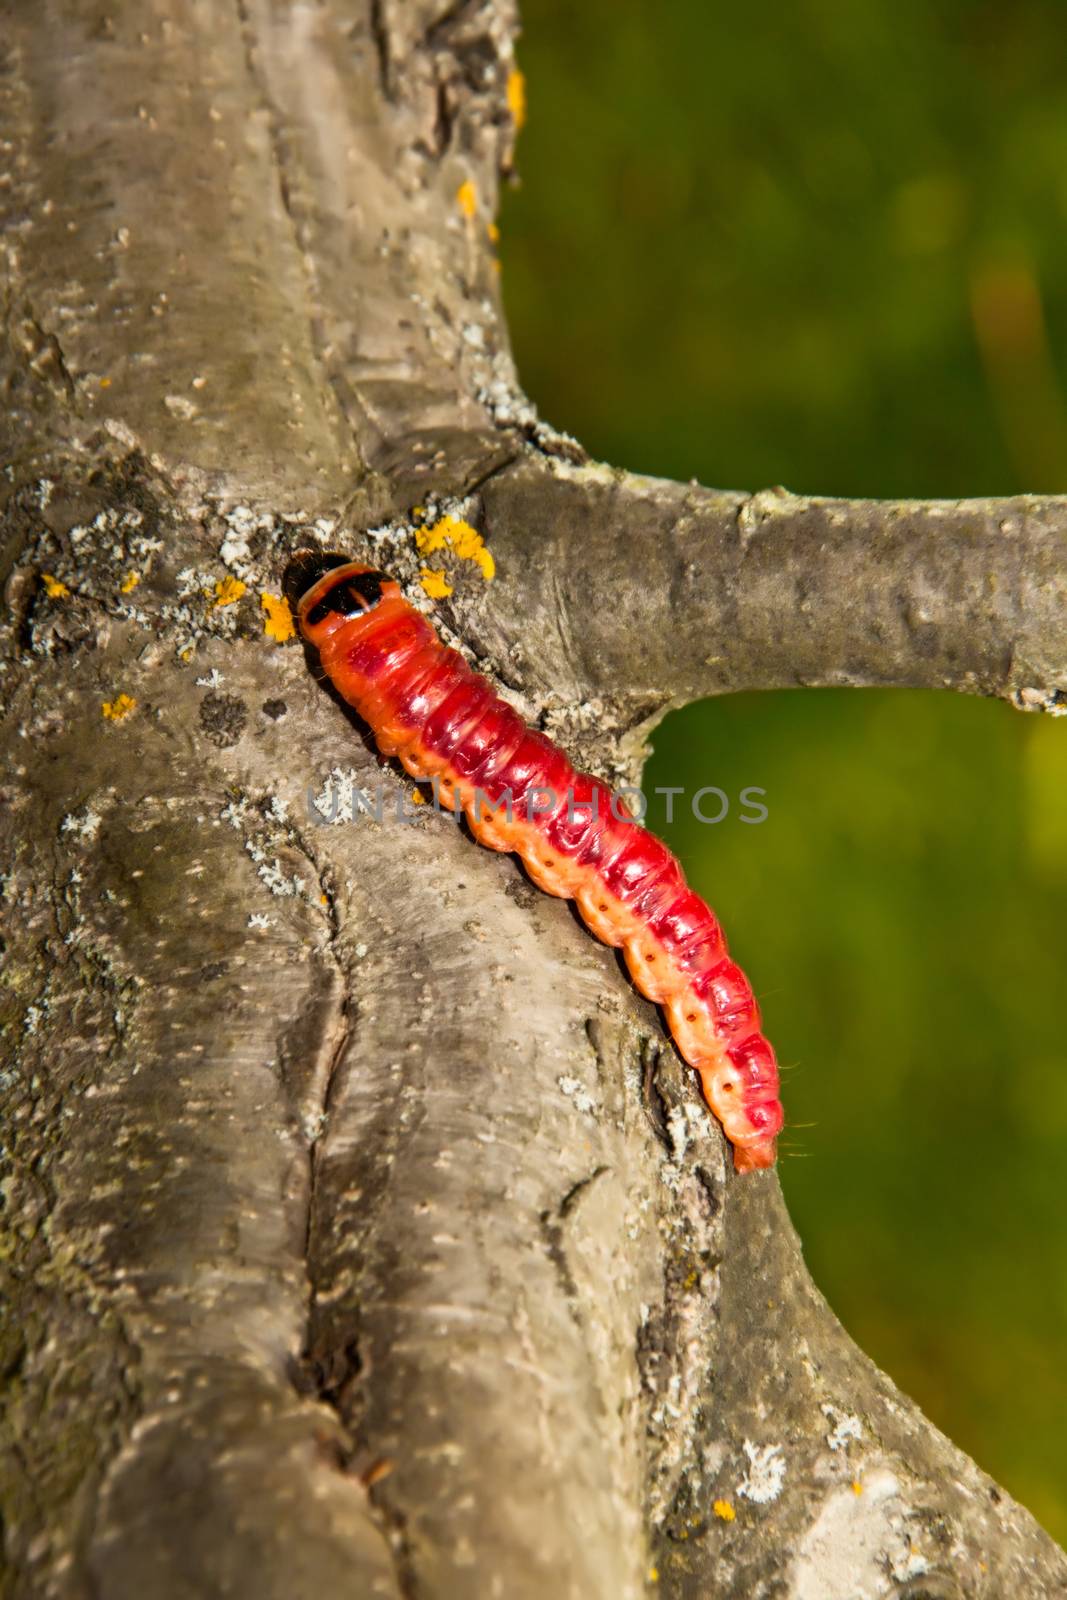  The big, bright beautiful caterpillar creeps on an apple-tree trunk by client111